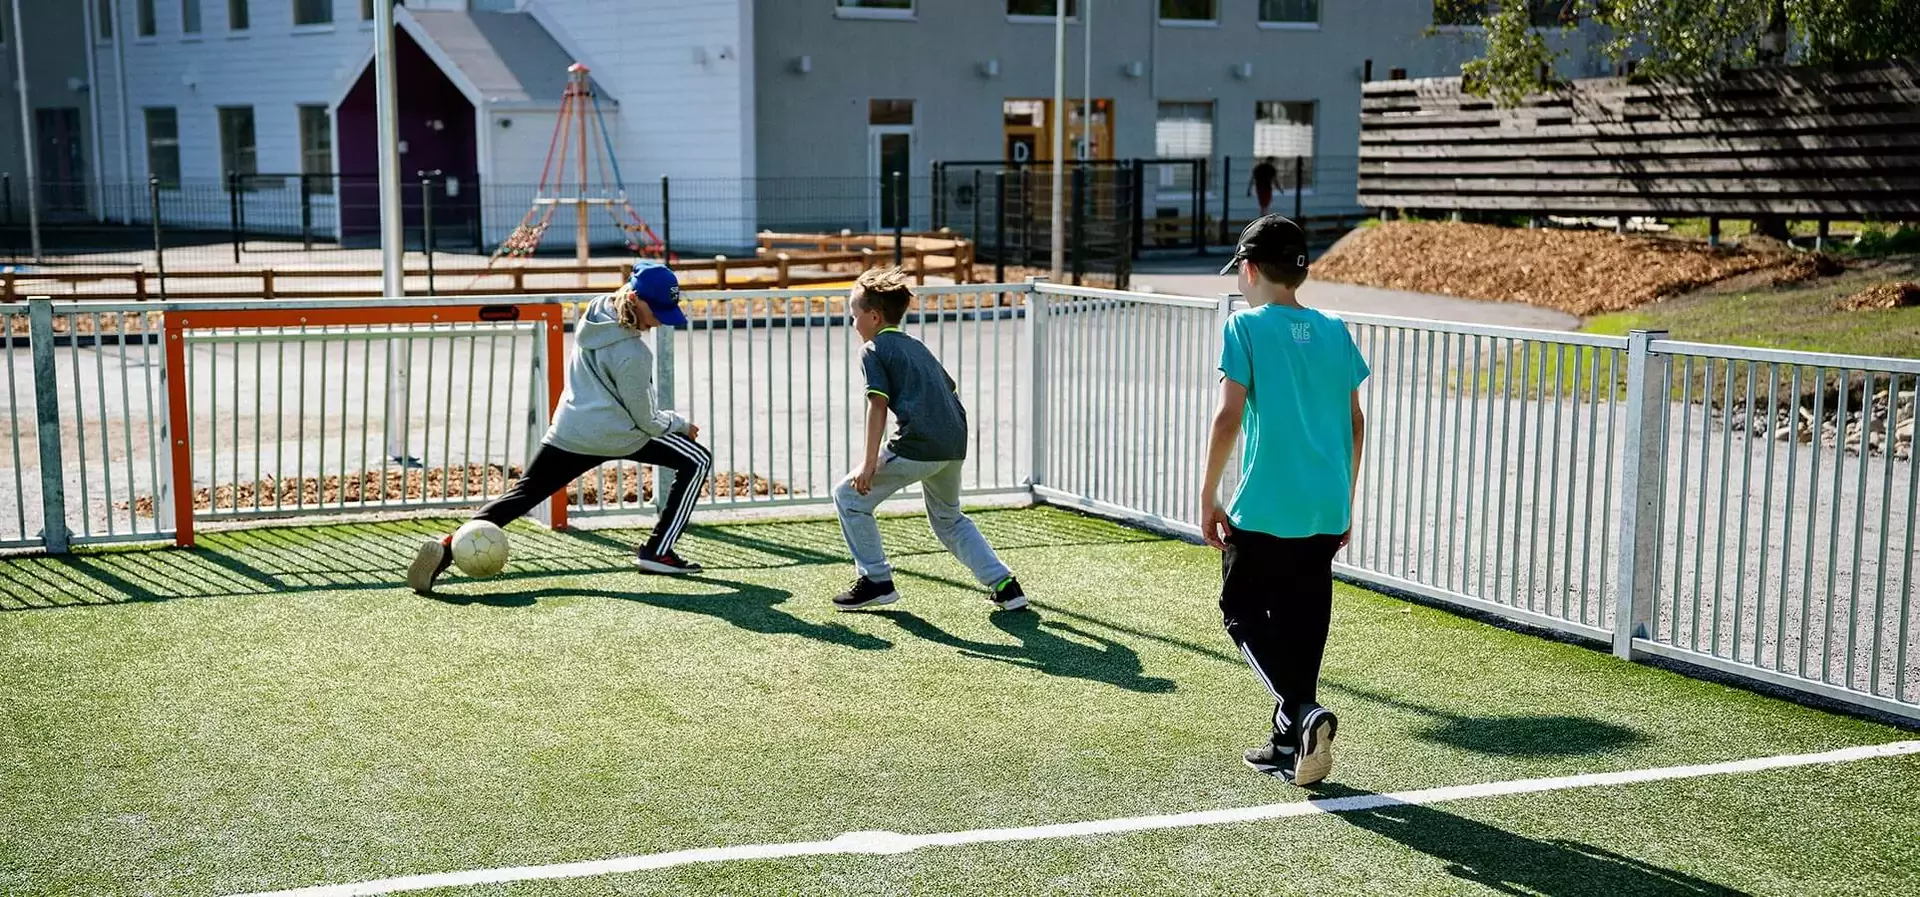 kids training football on outdoor multisport arena equipment reference image